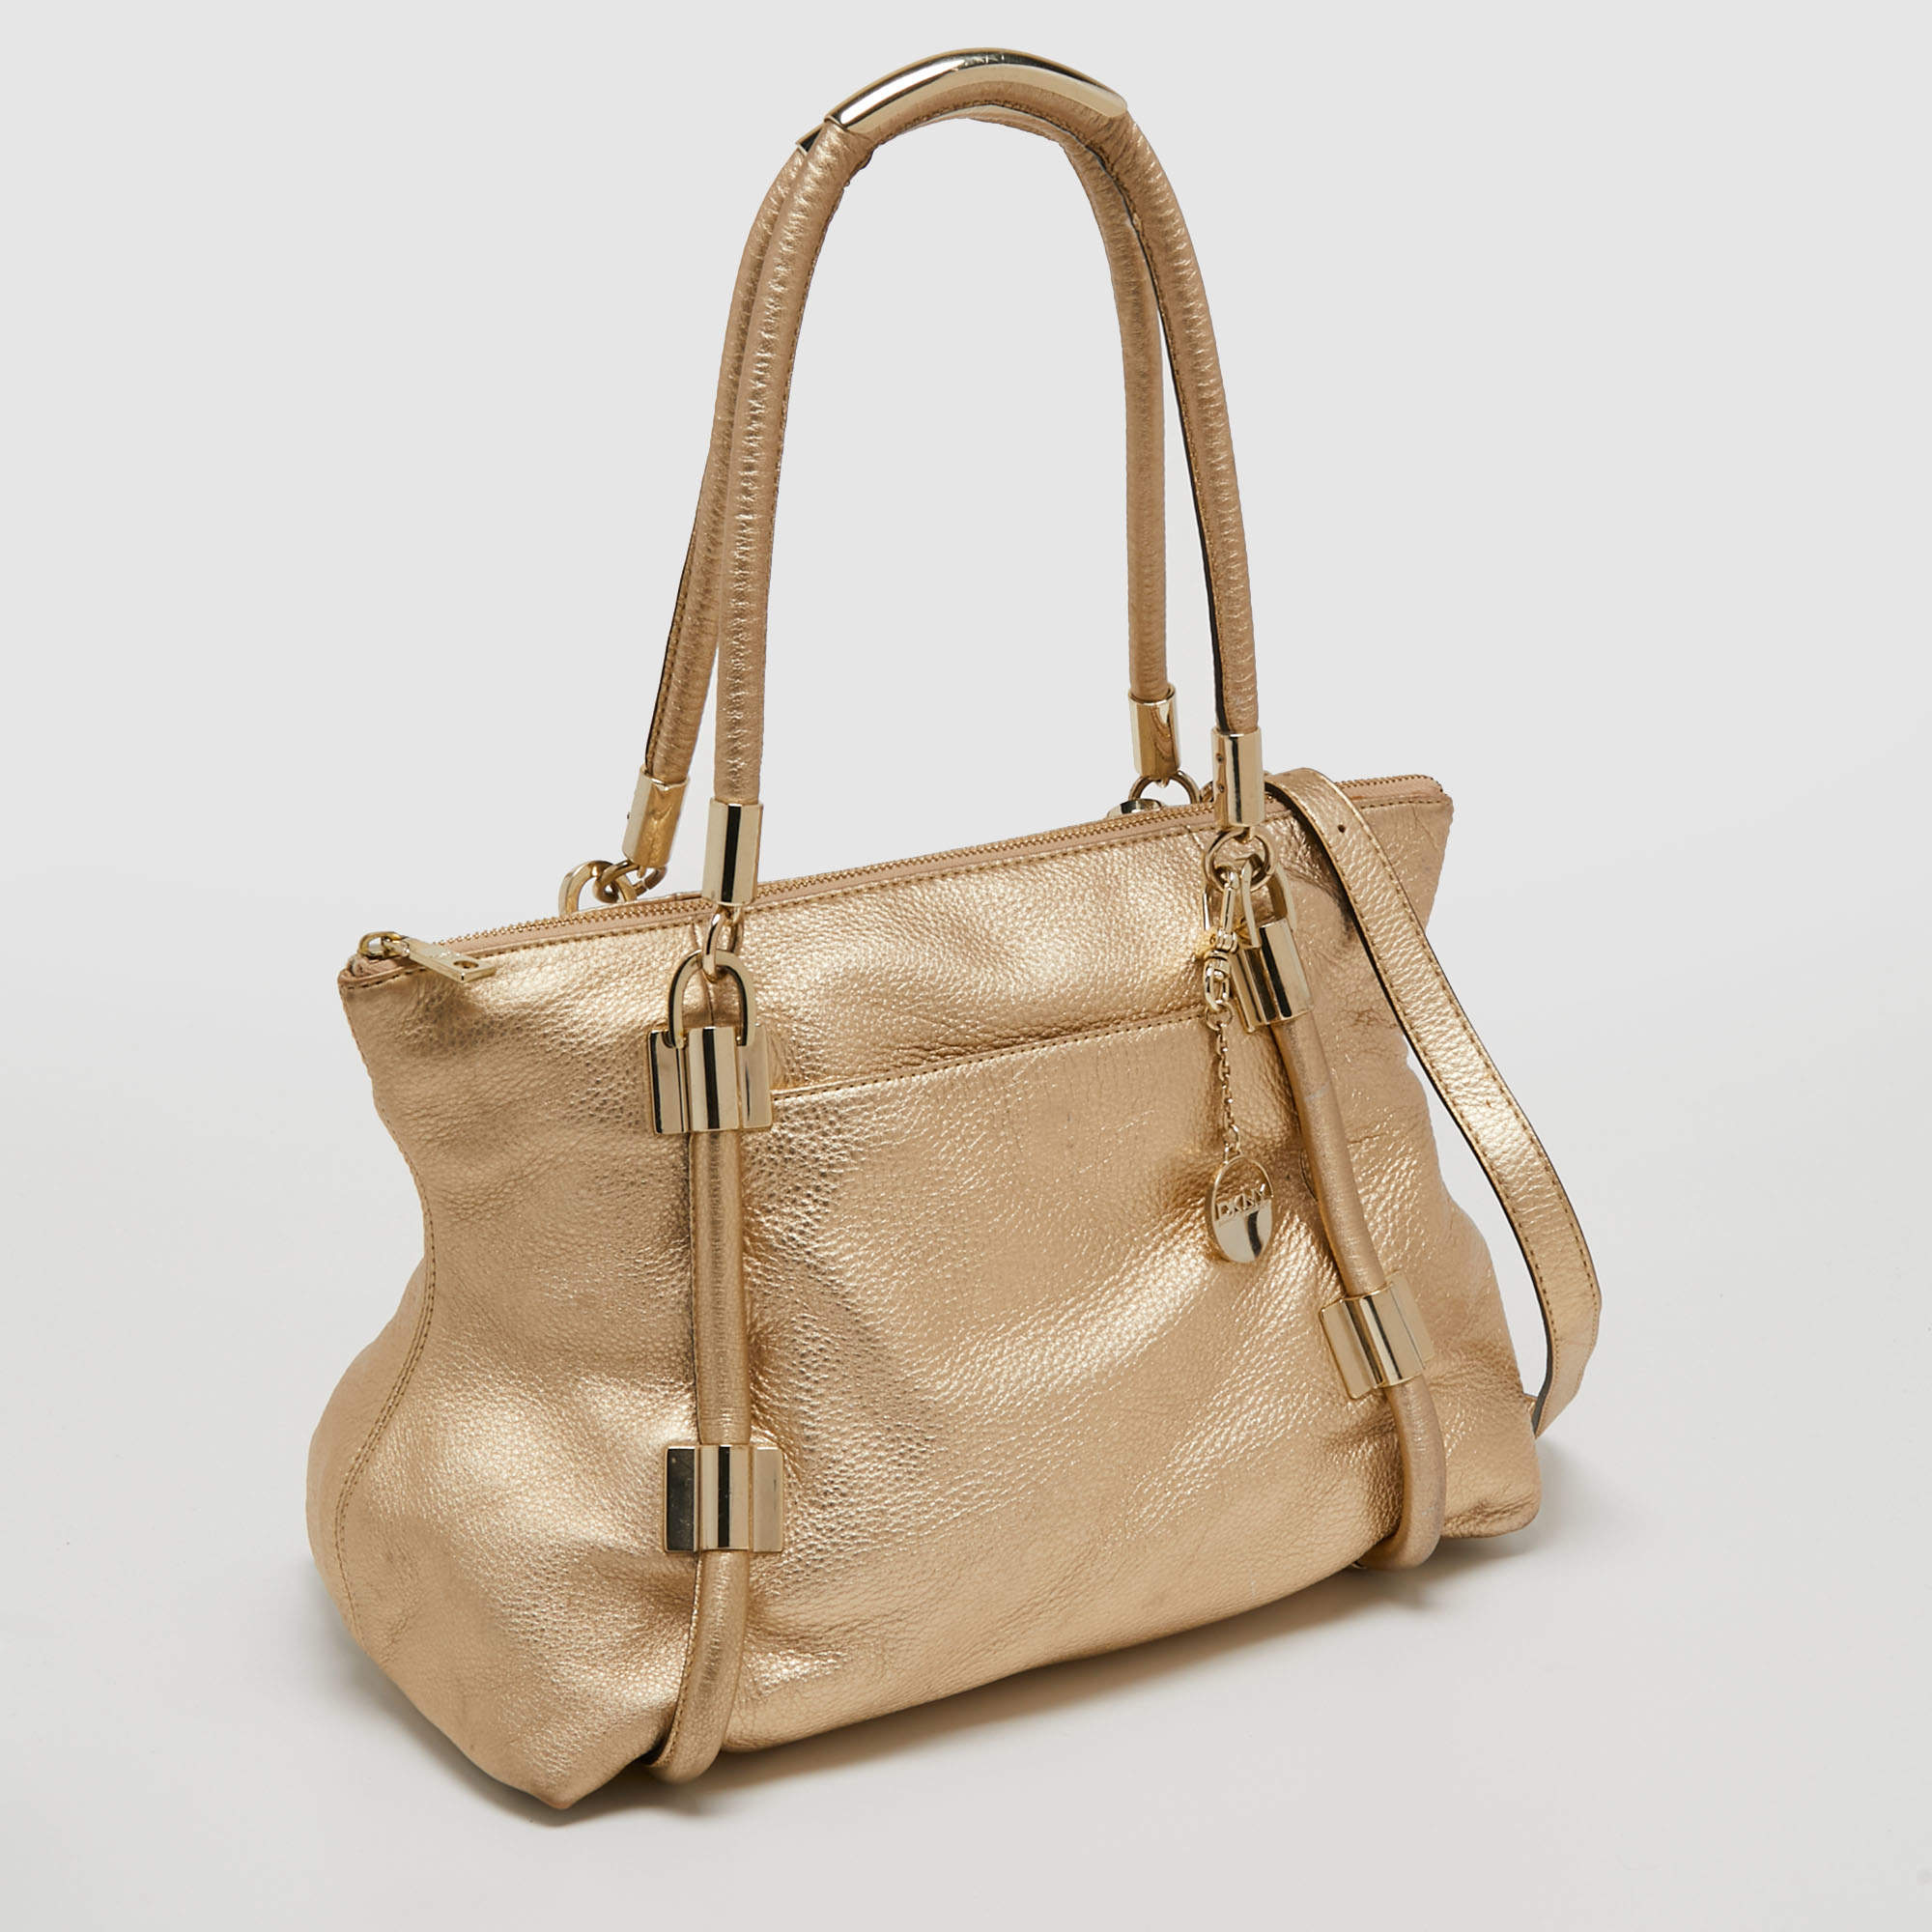 DKNY Gold Leather Chain Tote Dkny